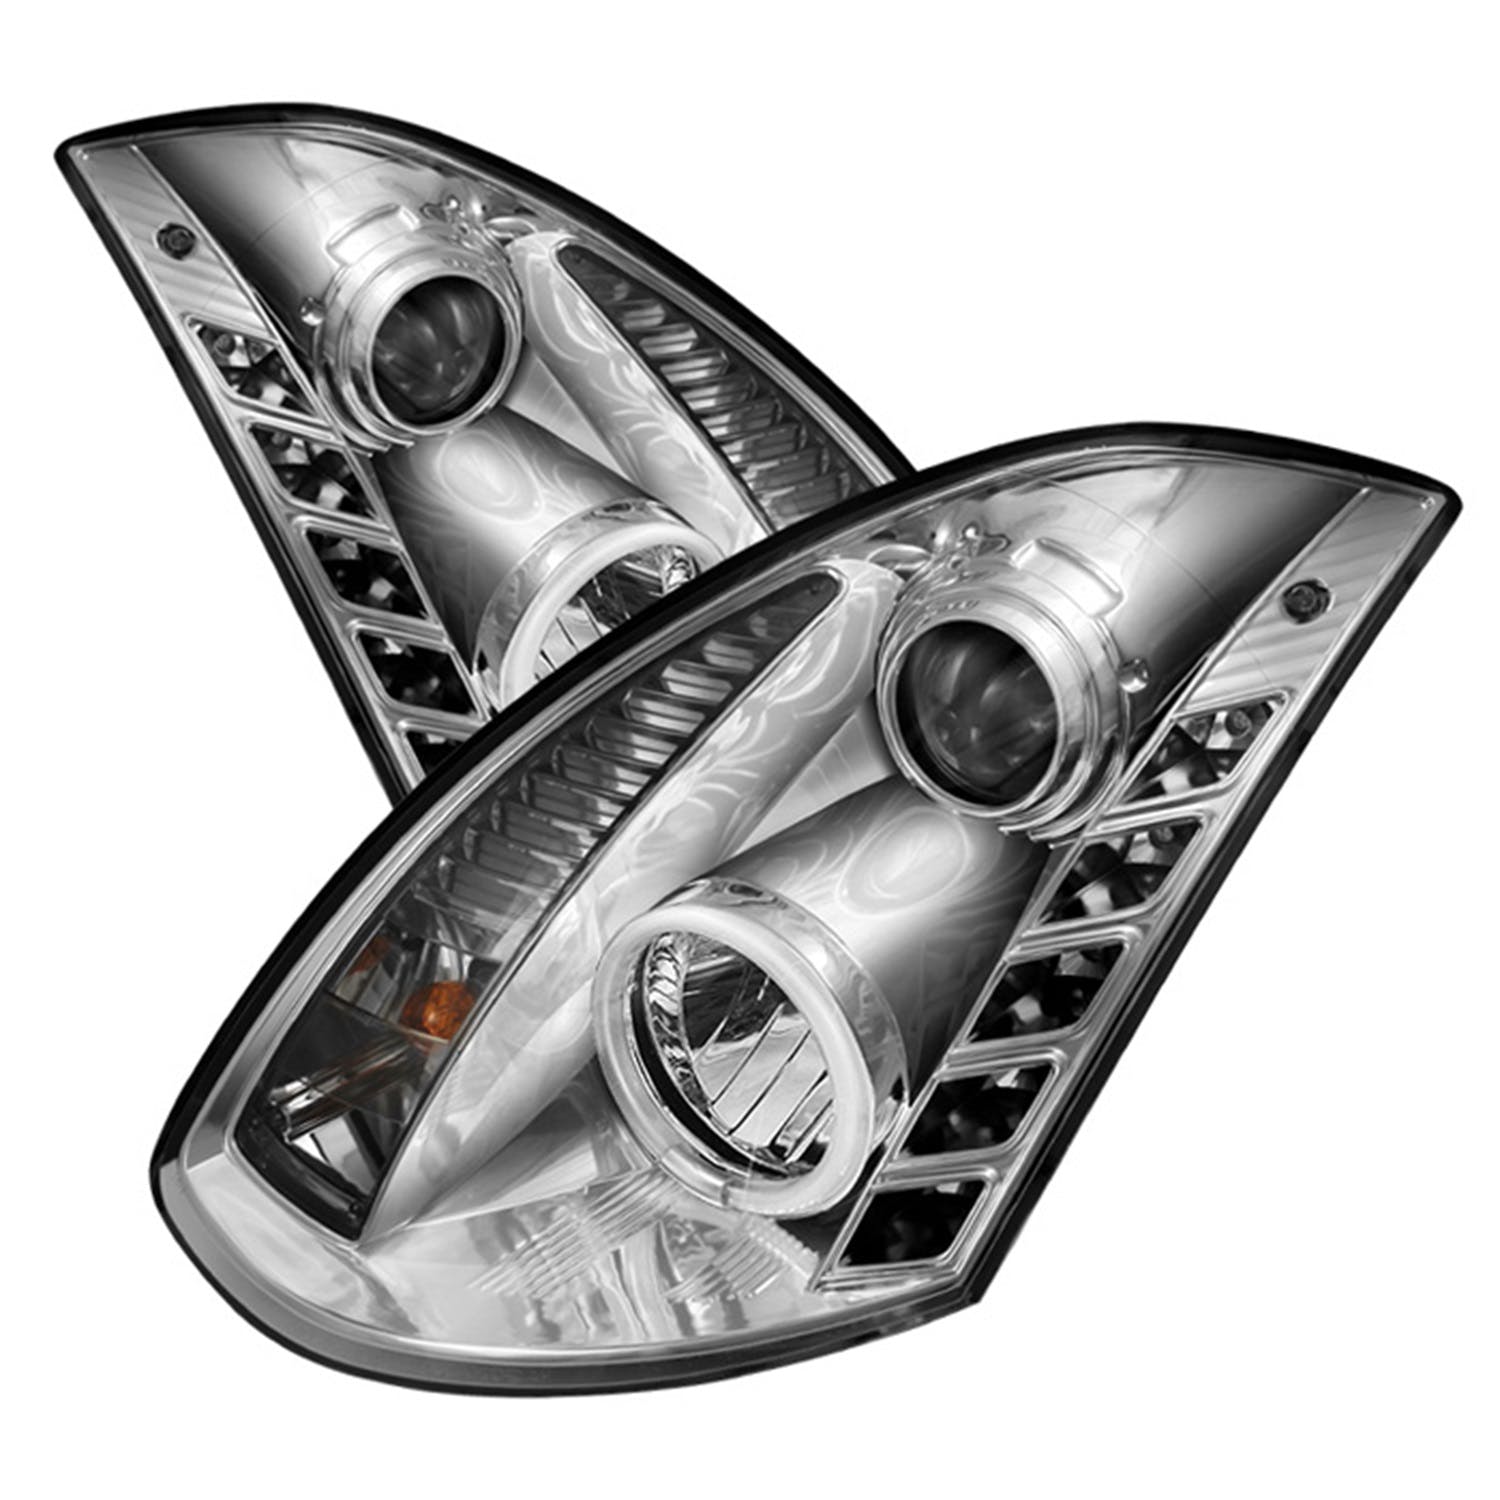 Spyder Auto 5029881 ( SPYDER ) INFINITI G35 03-07 2DR PROJECTOR HEADLIGHTS-XENON/HID MODEL ONLY ( NO